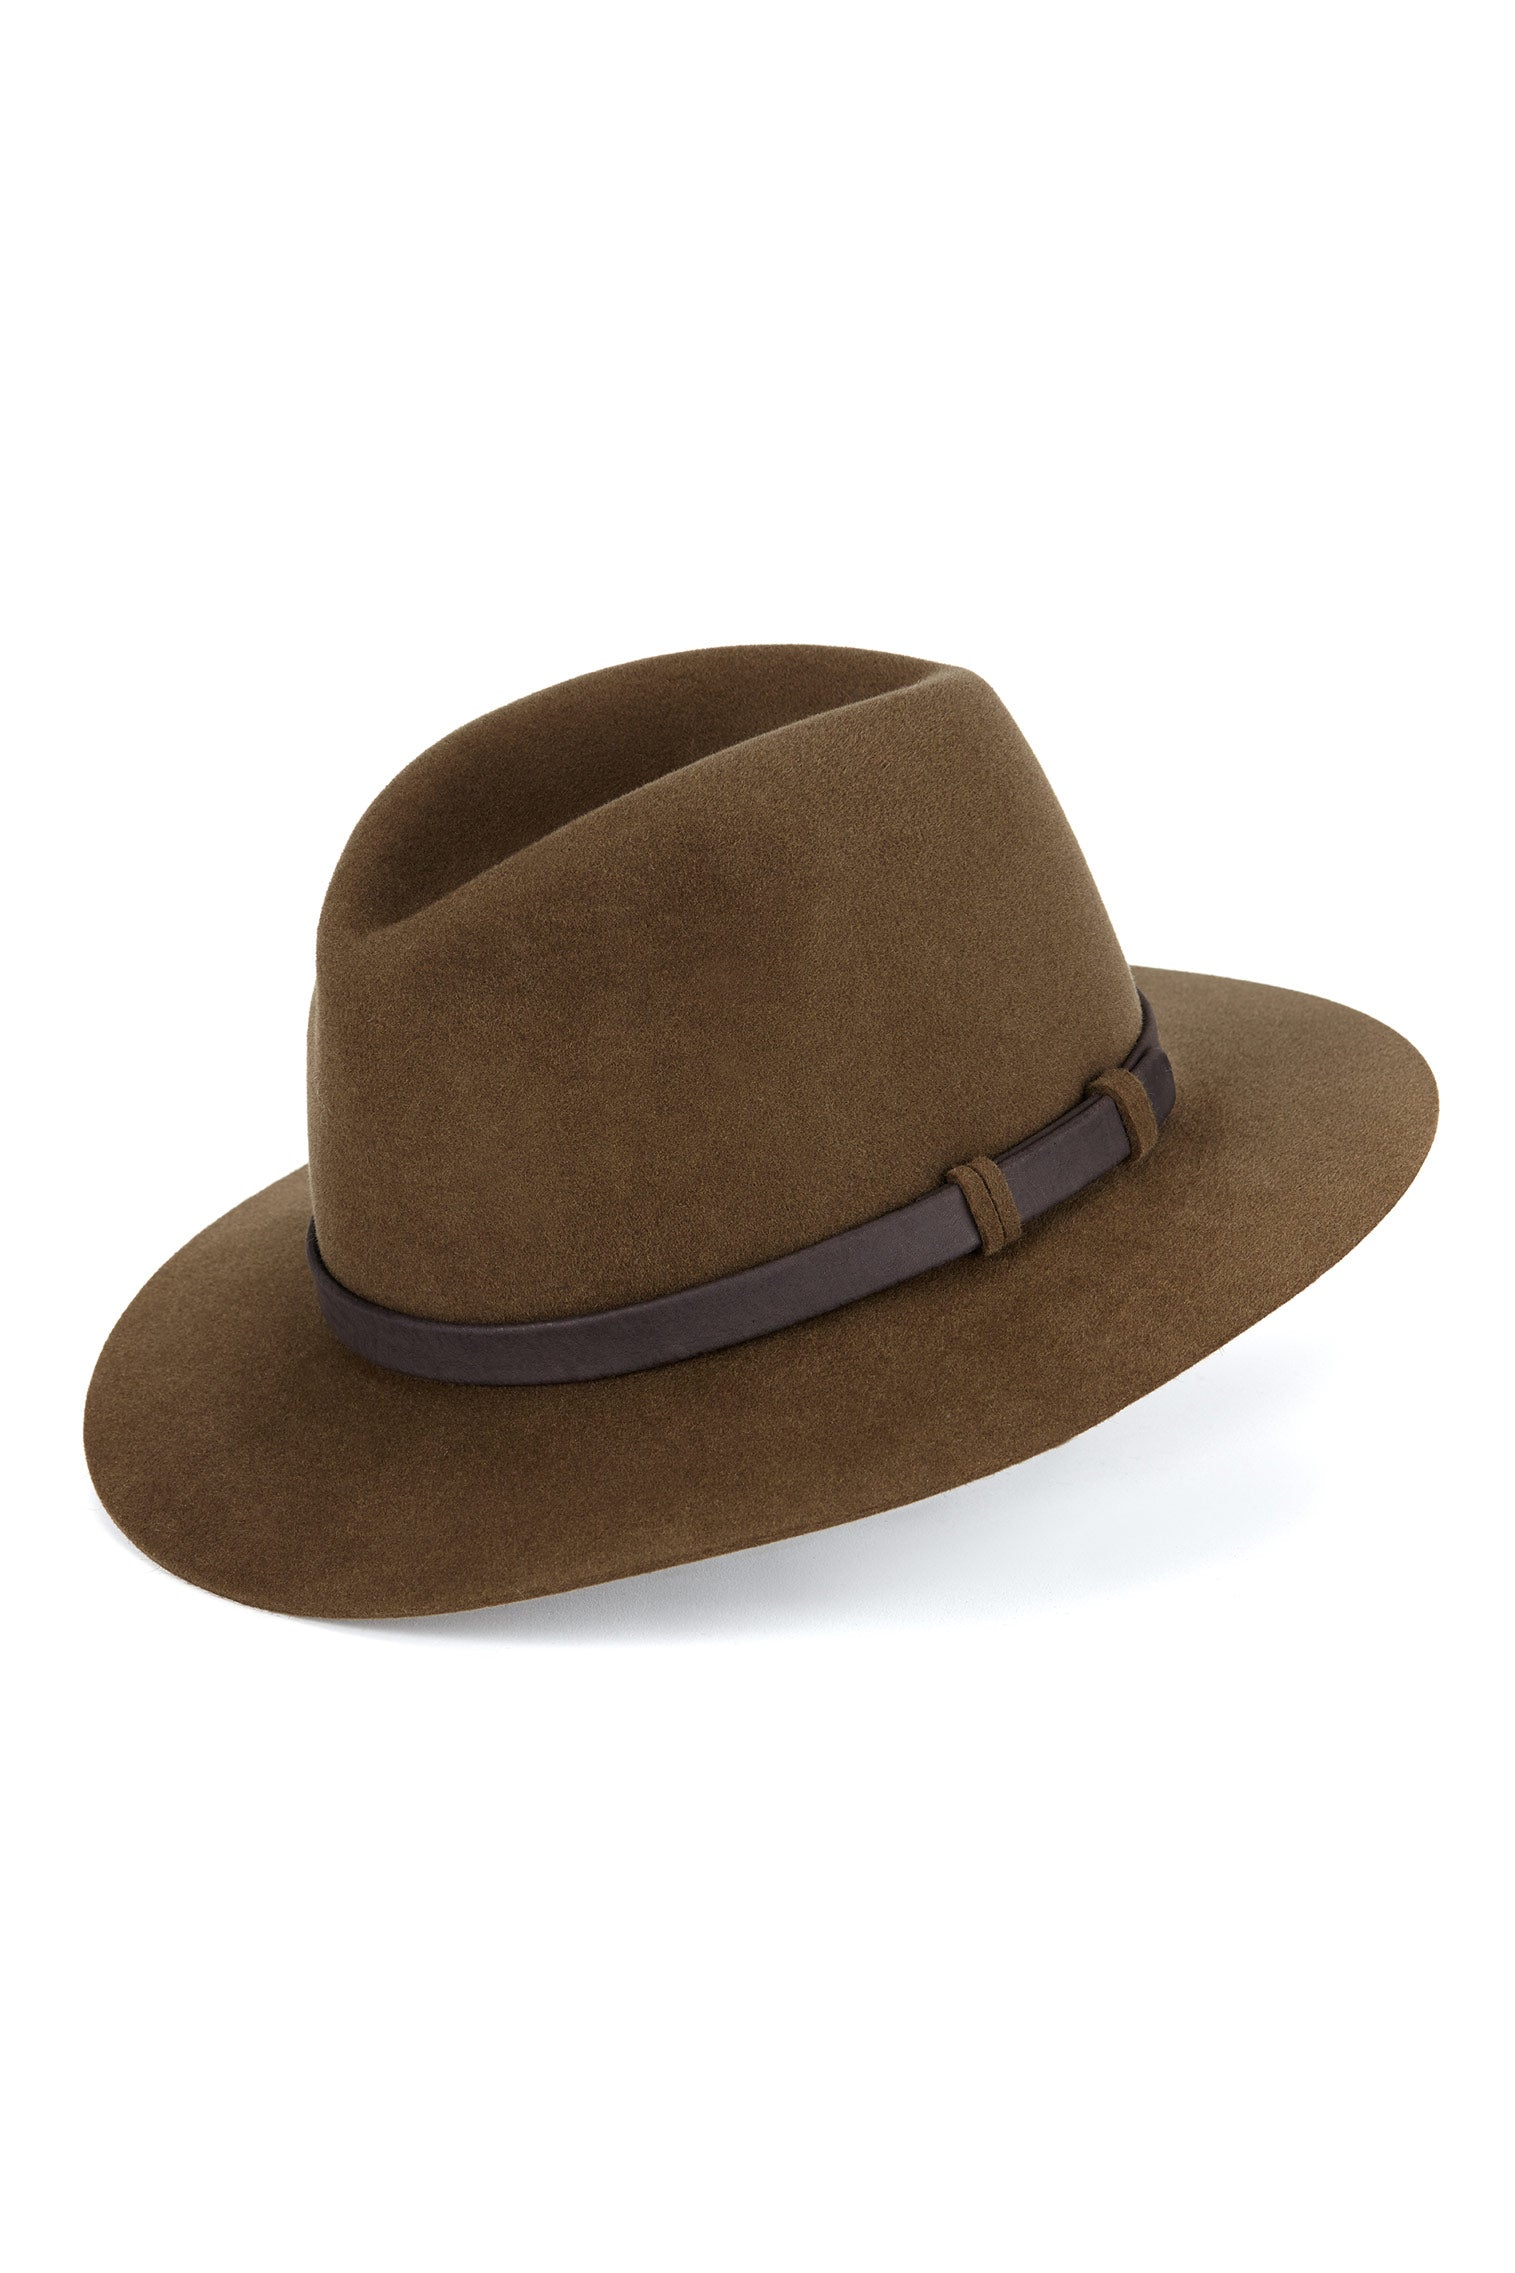 Chepstow Trilby - Hats for Tall People - Lock & Co. Hatters London UK